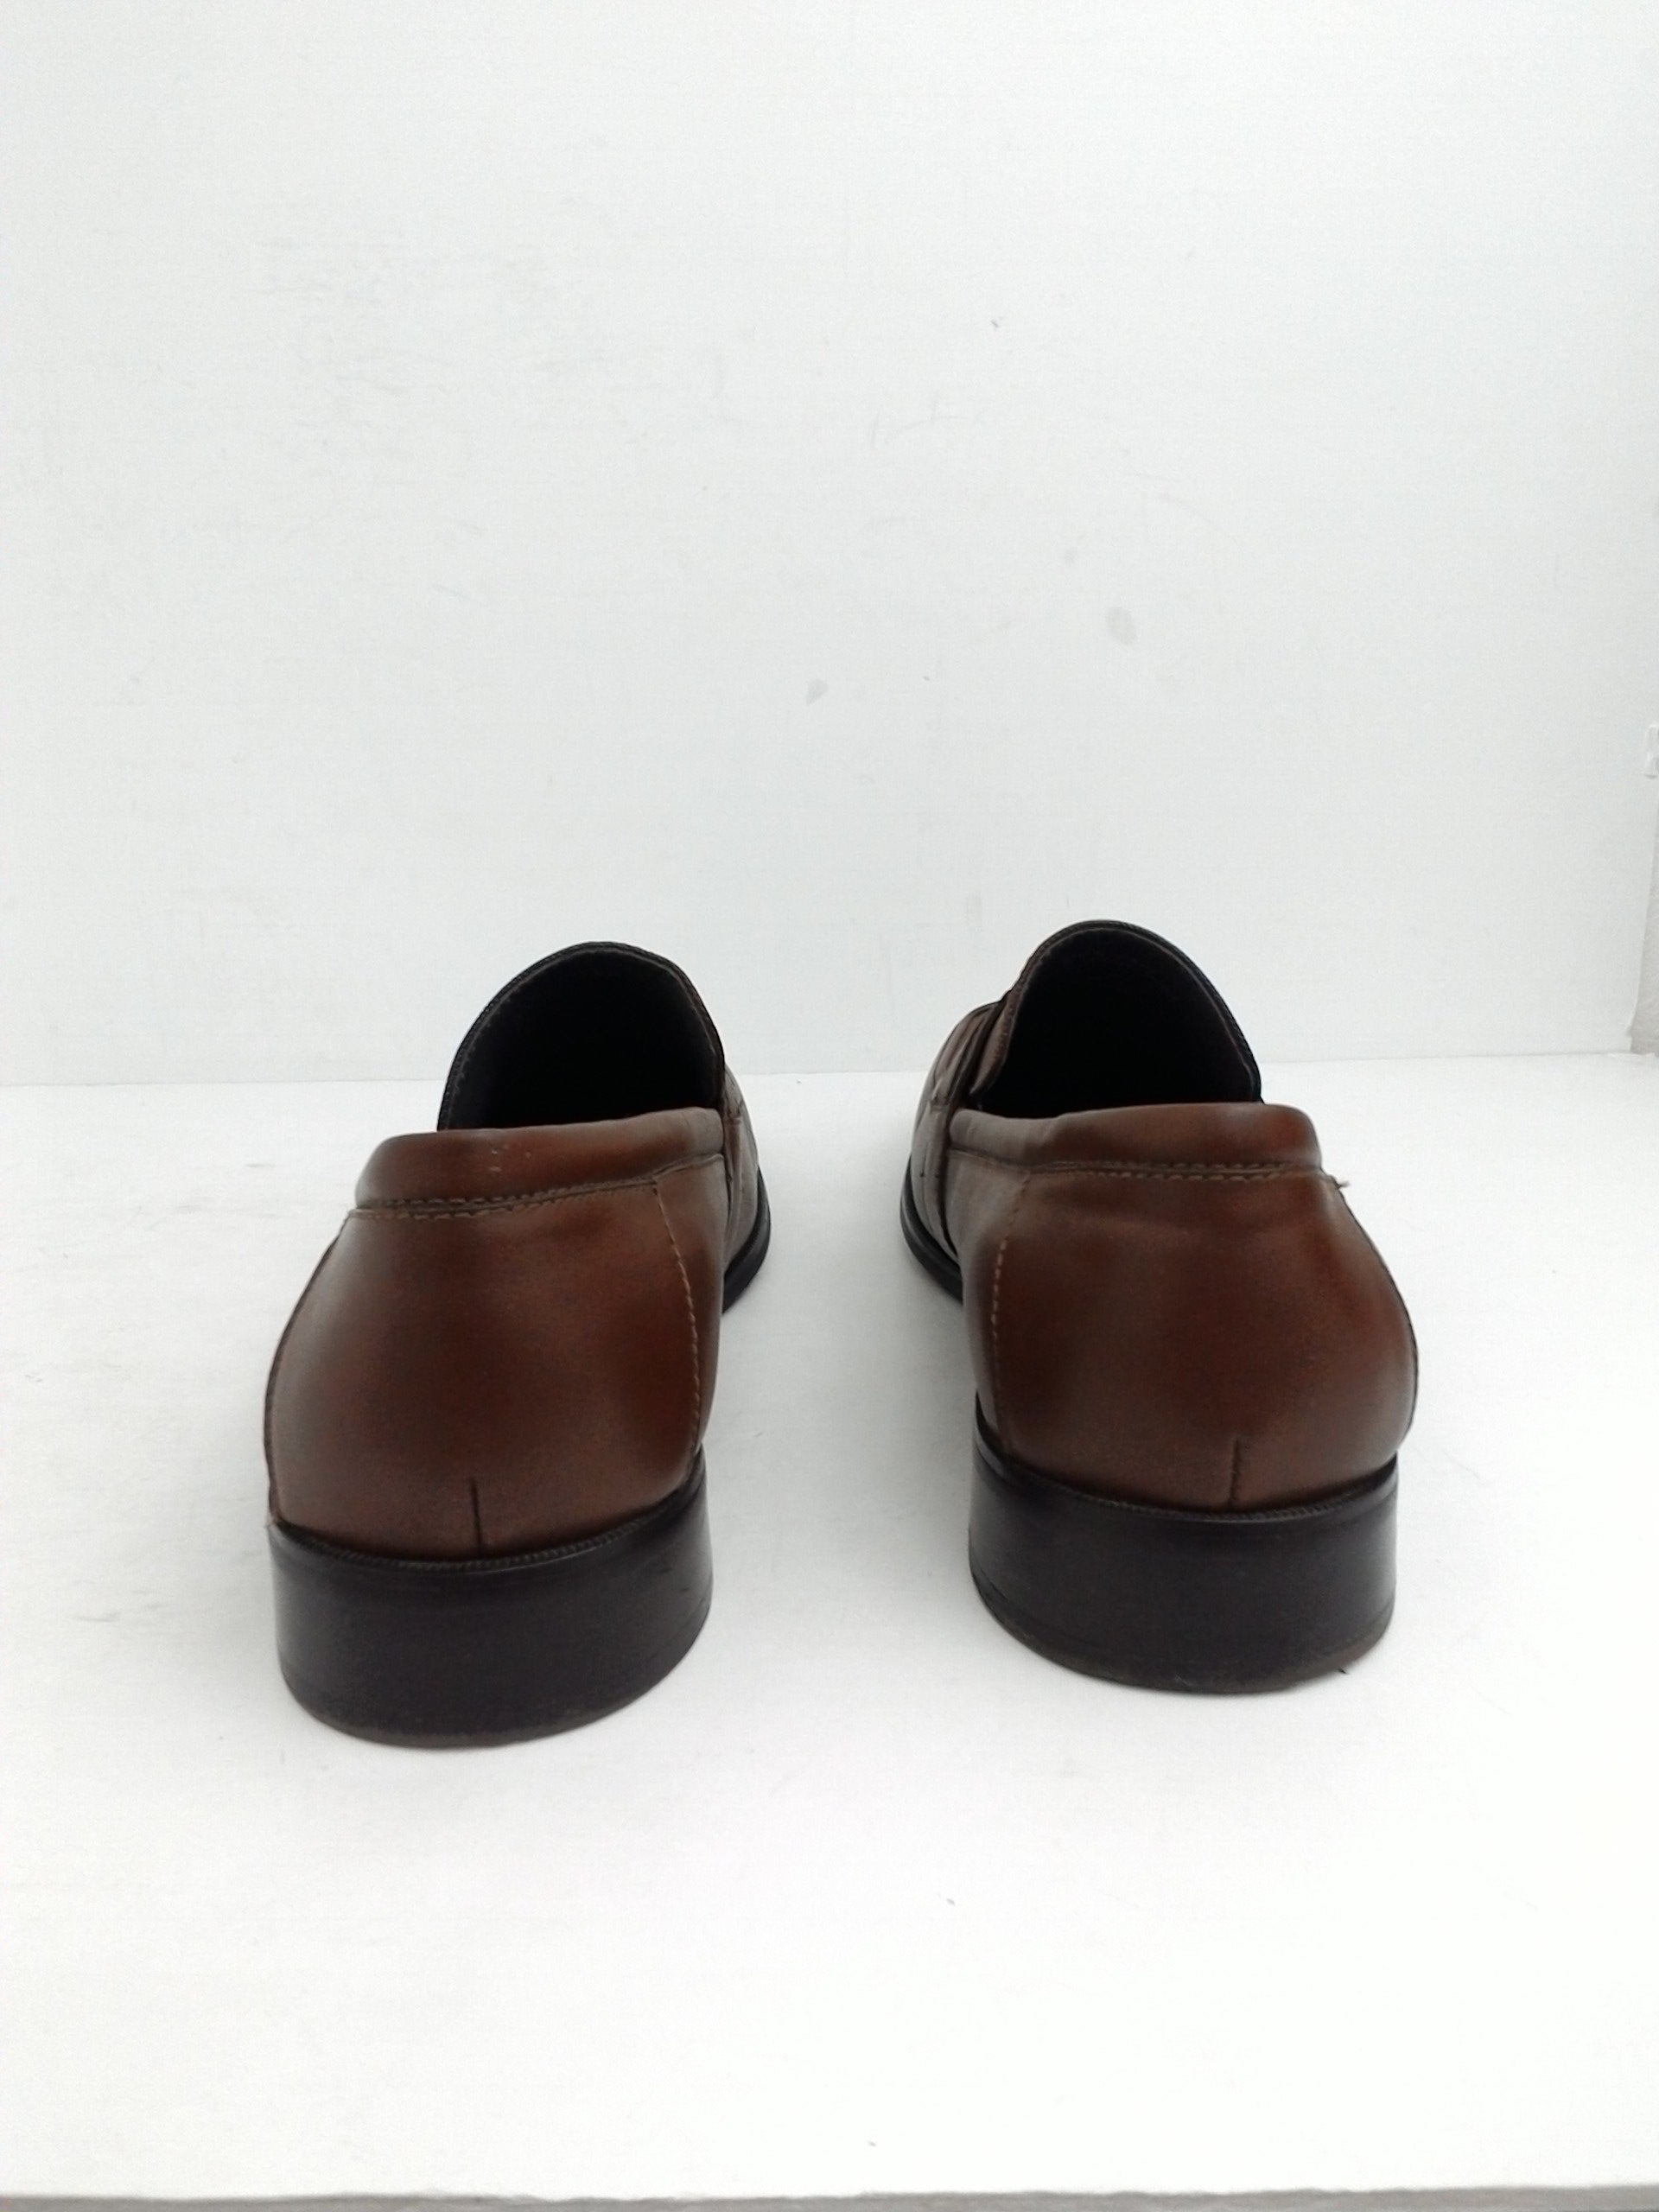 Calvin Klein Men's Jameson Soft Leather Loafers, Brown Size 11.5 M ...